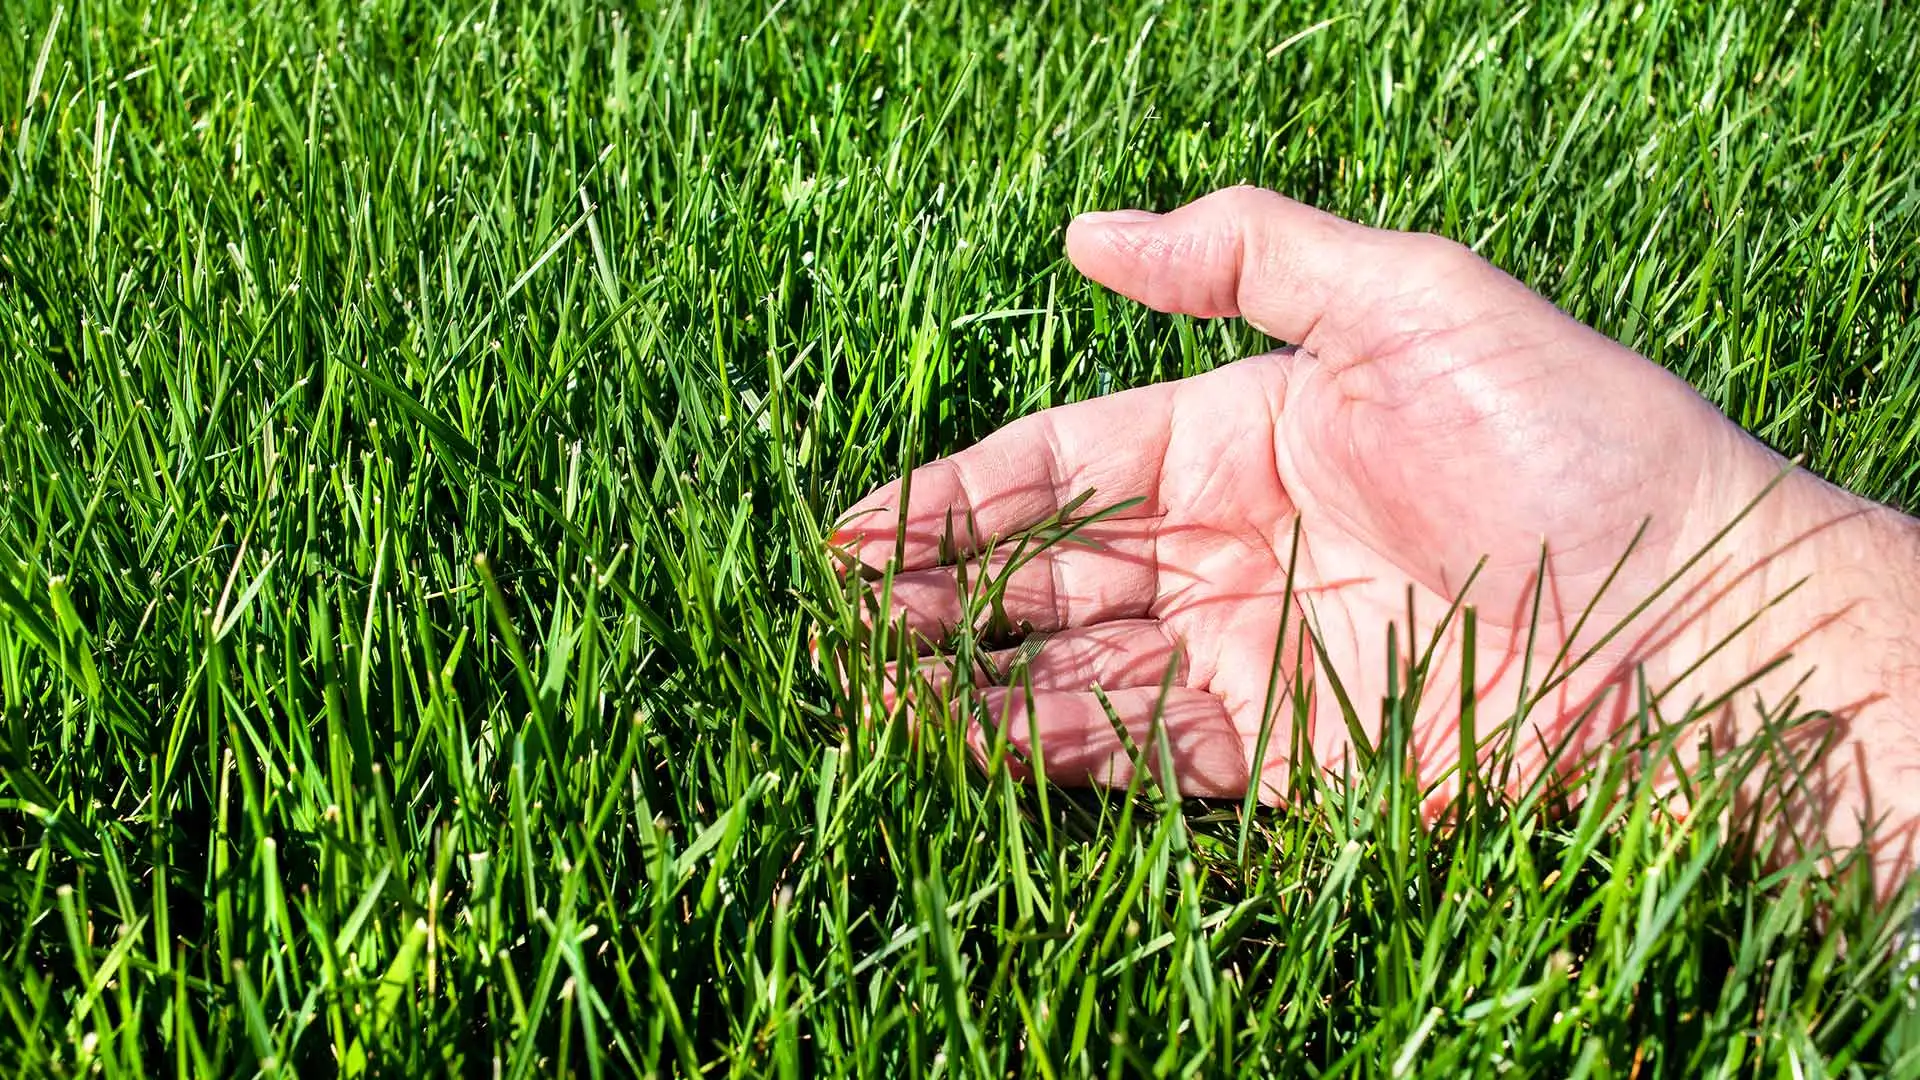 Grass or Lawn Weeds - How to Identify the Grassy Weeds in Your Lawn